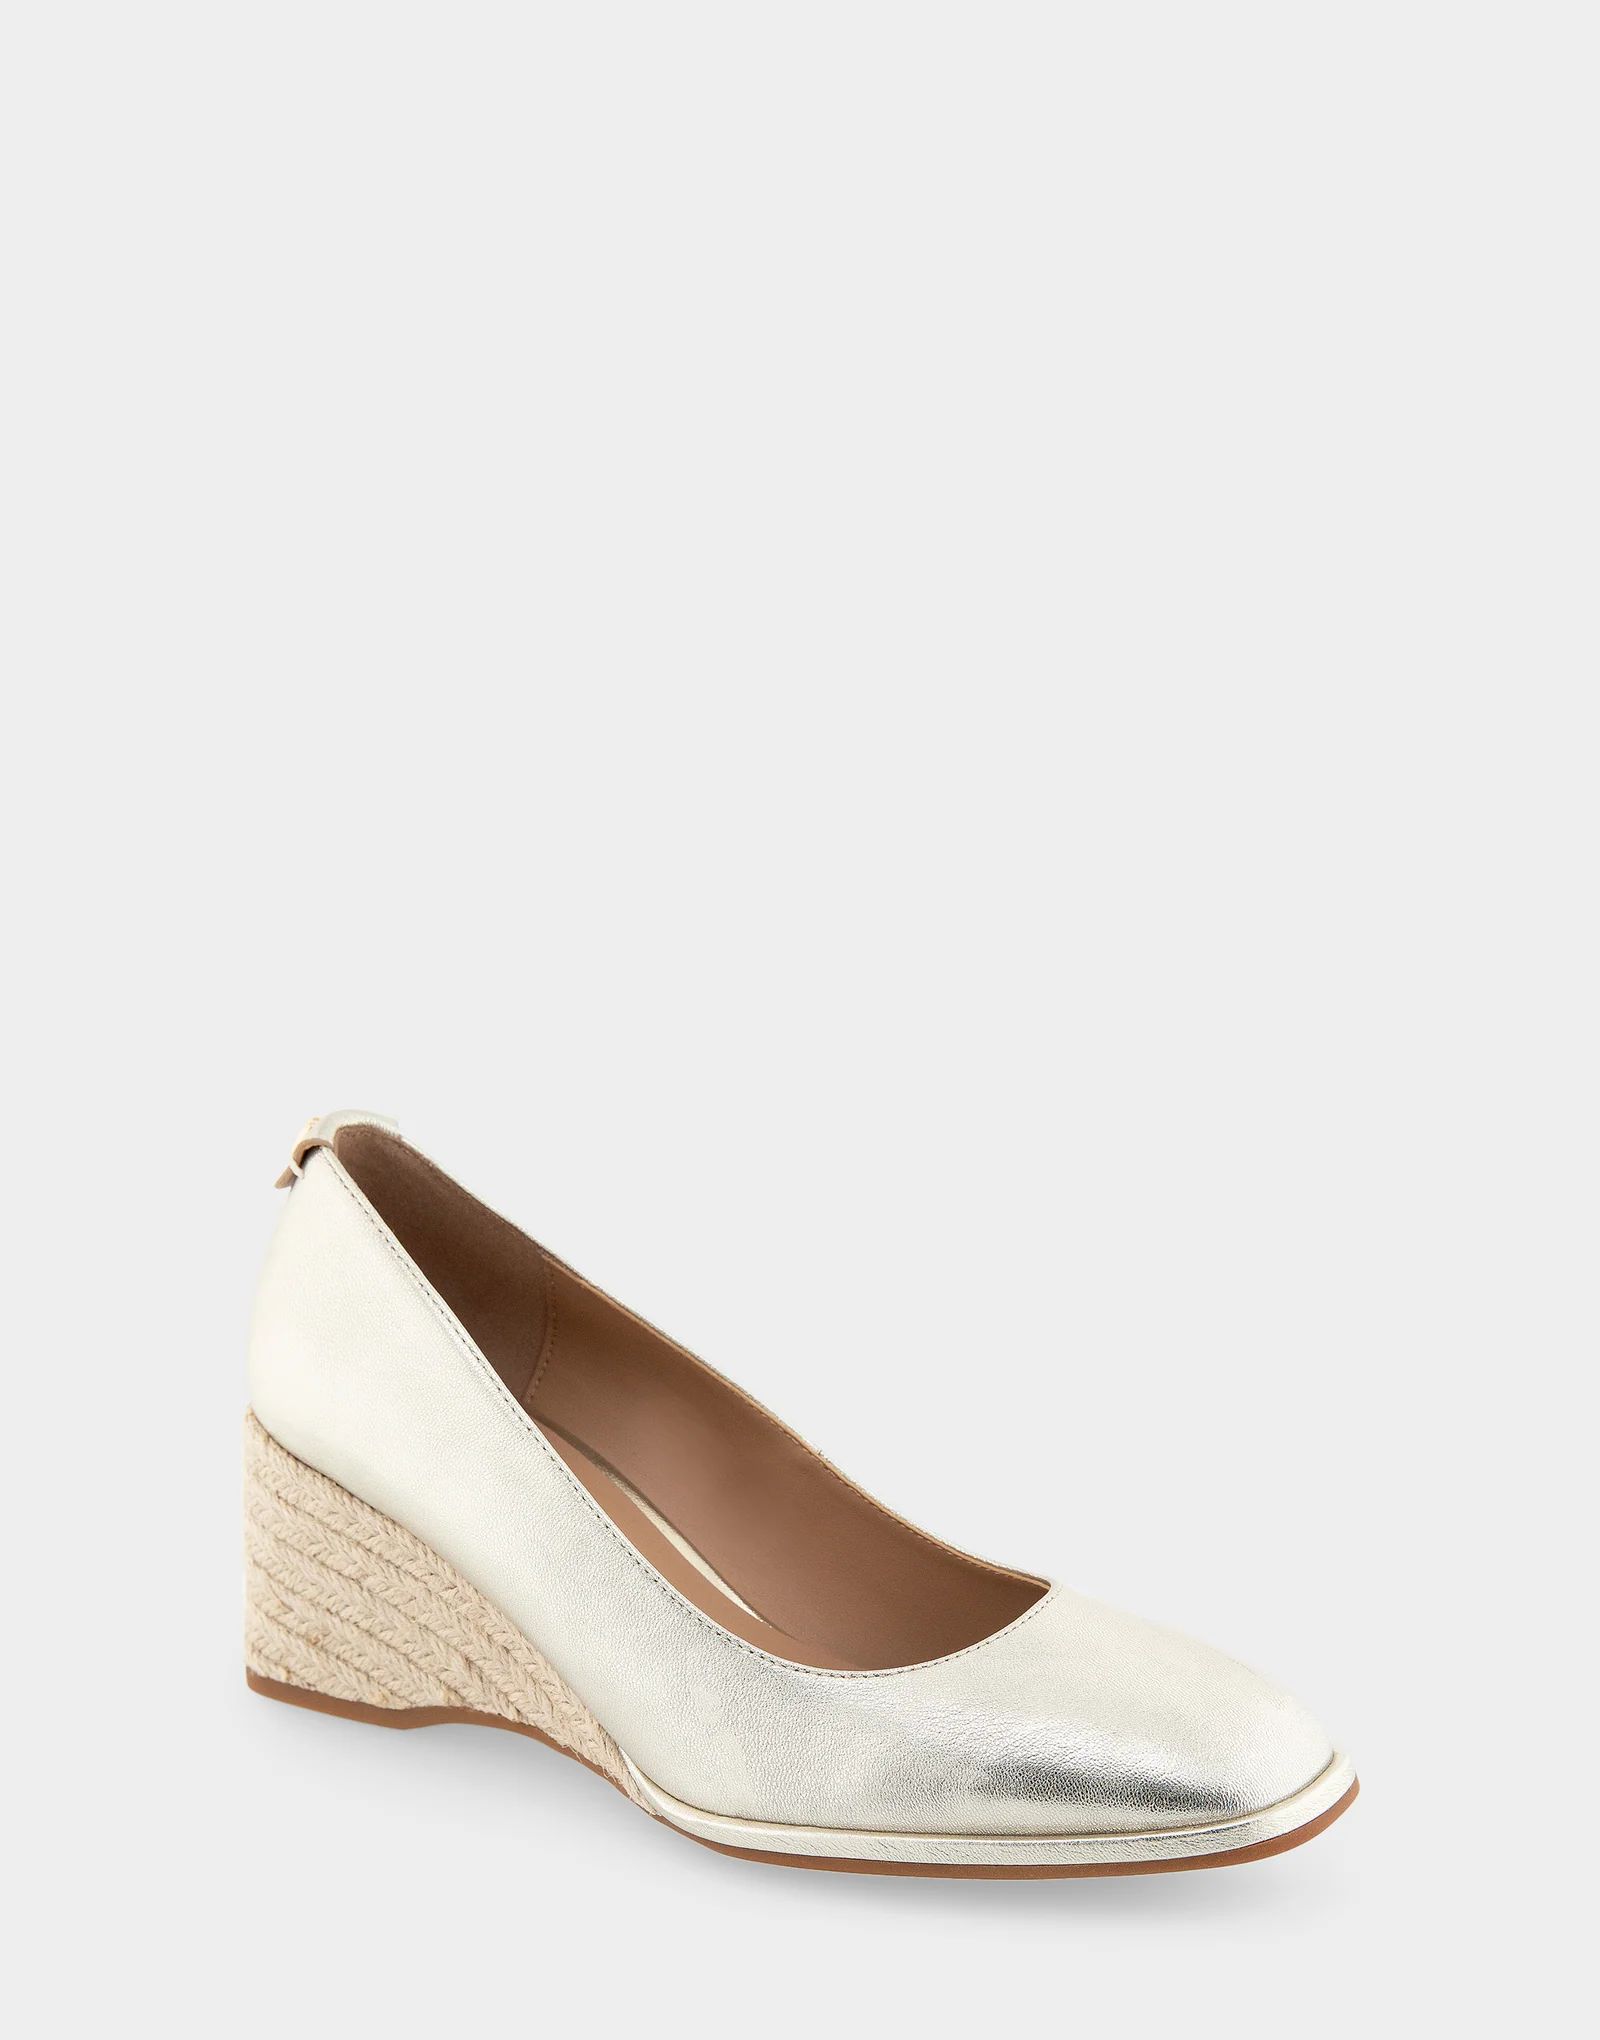 Women's Sculpted Wedge Pump in Soft Gold Leather | Aerosoles